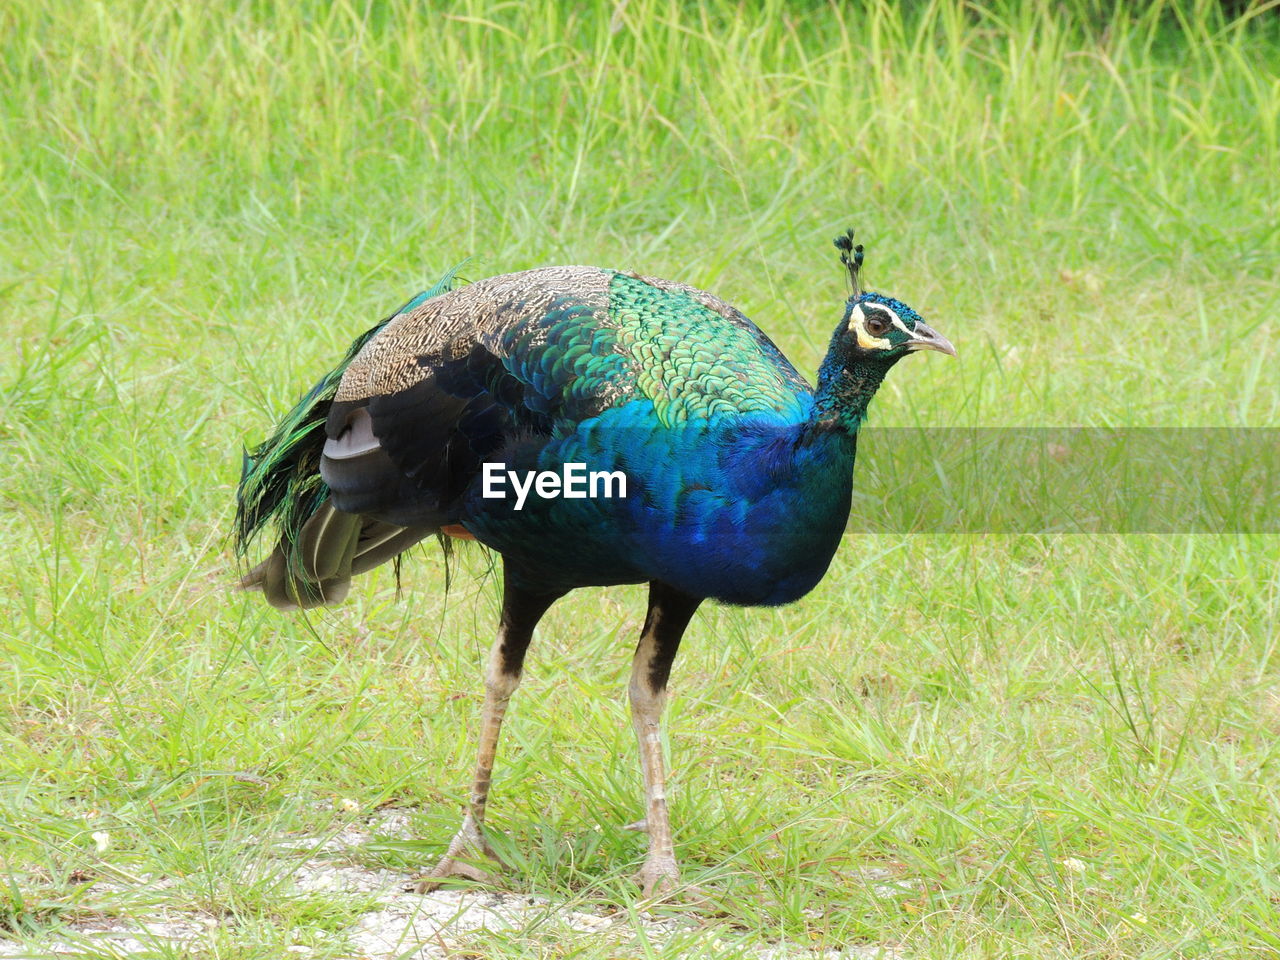 CLOSE-UP OF PEACOCK ON GRASS